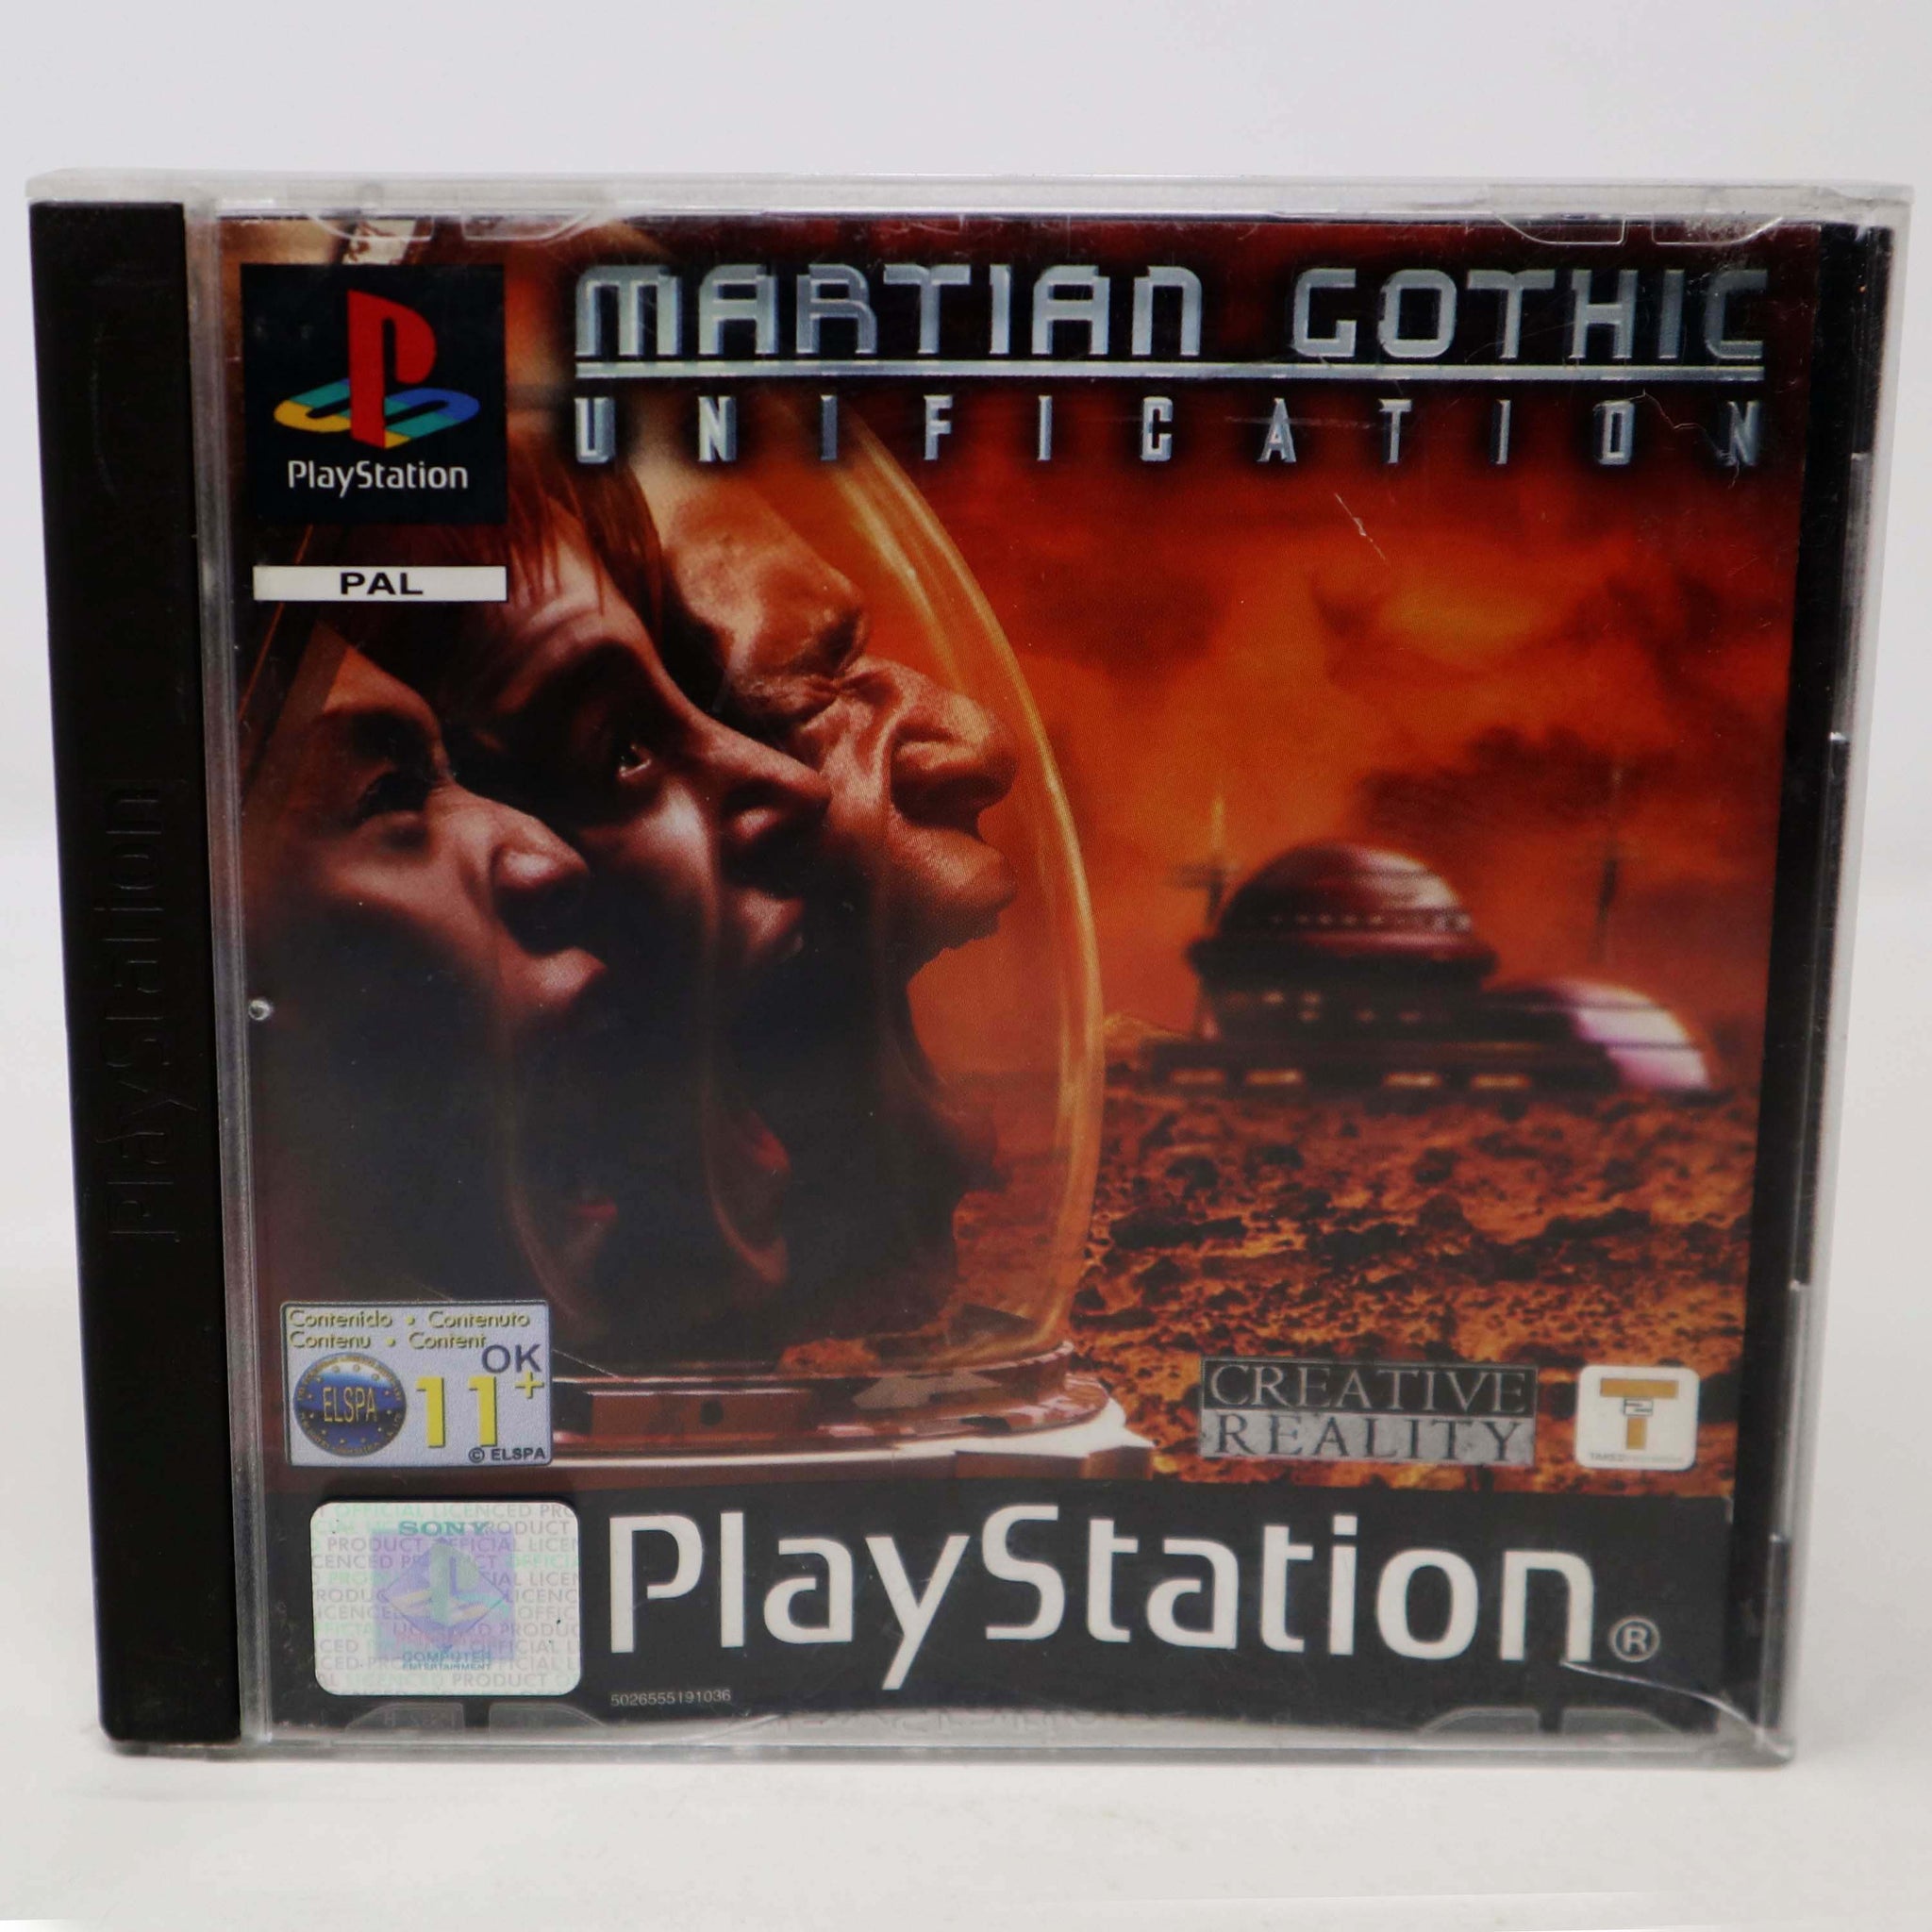 Vintage 2001 Playstation 1 PS1 Martian Gothic Unification Video Game Pal Version 1 Player